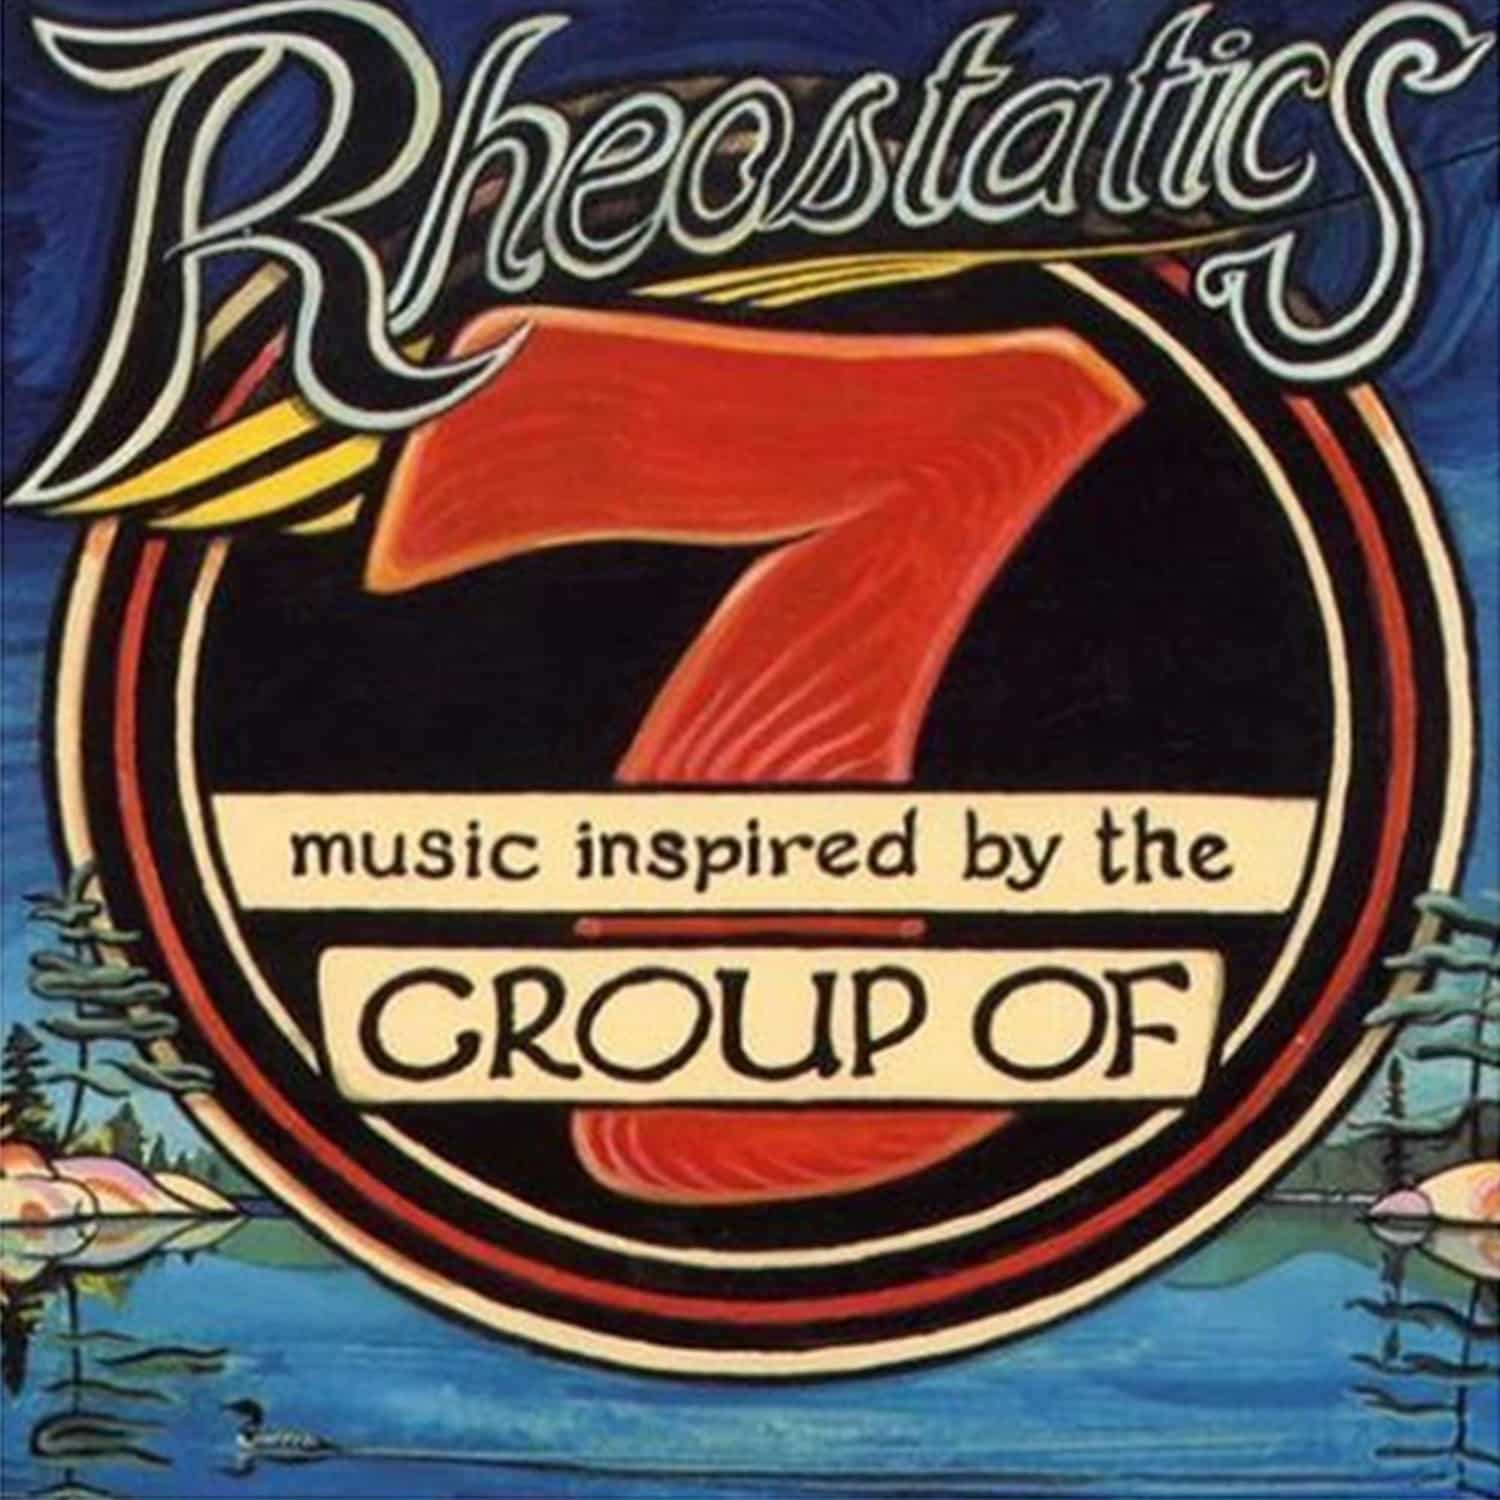 Rheostatics - MUSIC INSPIRED BY THE GROUP OF 7 